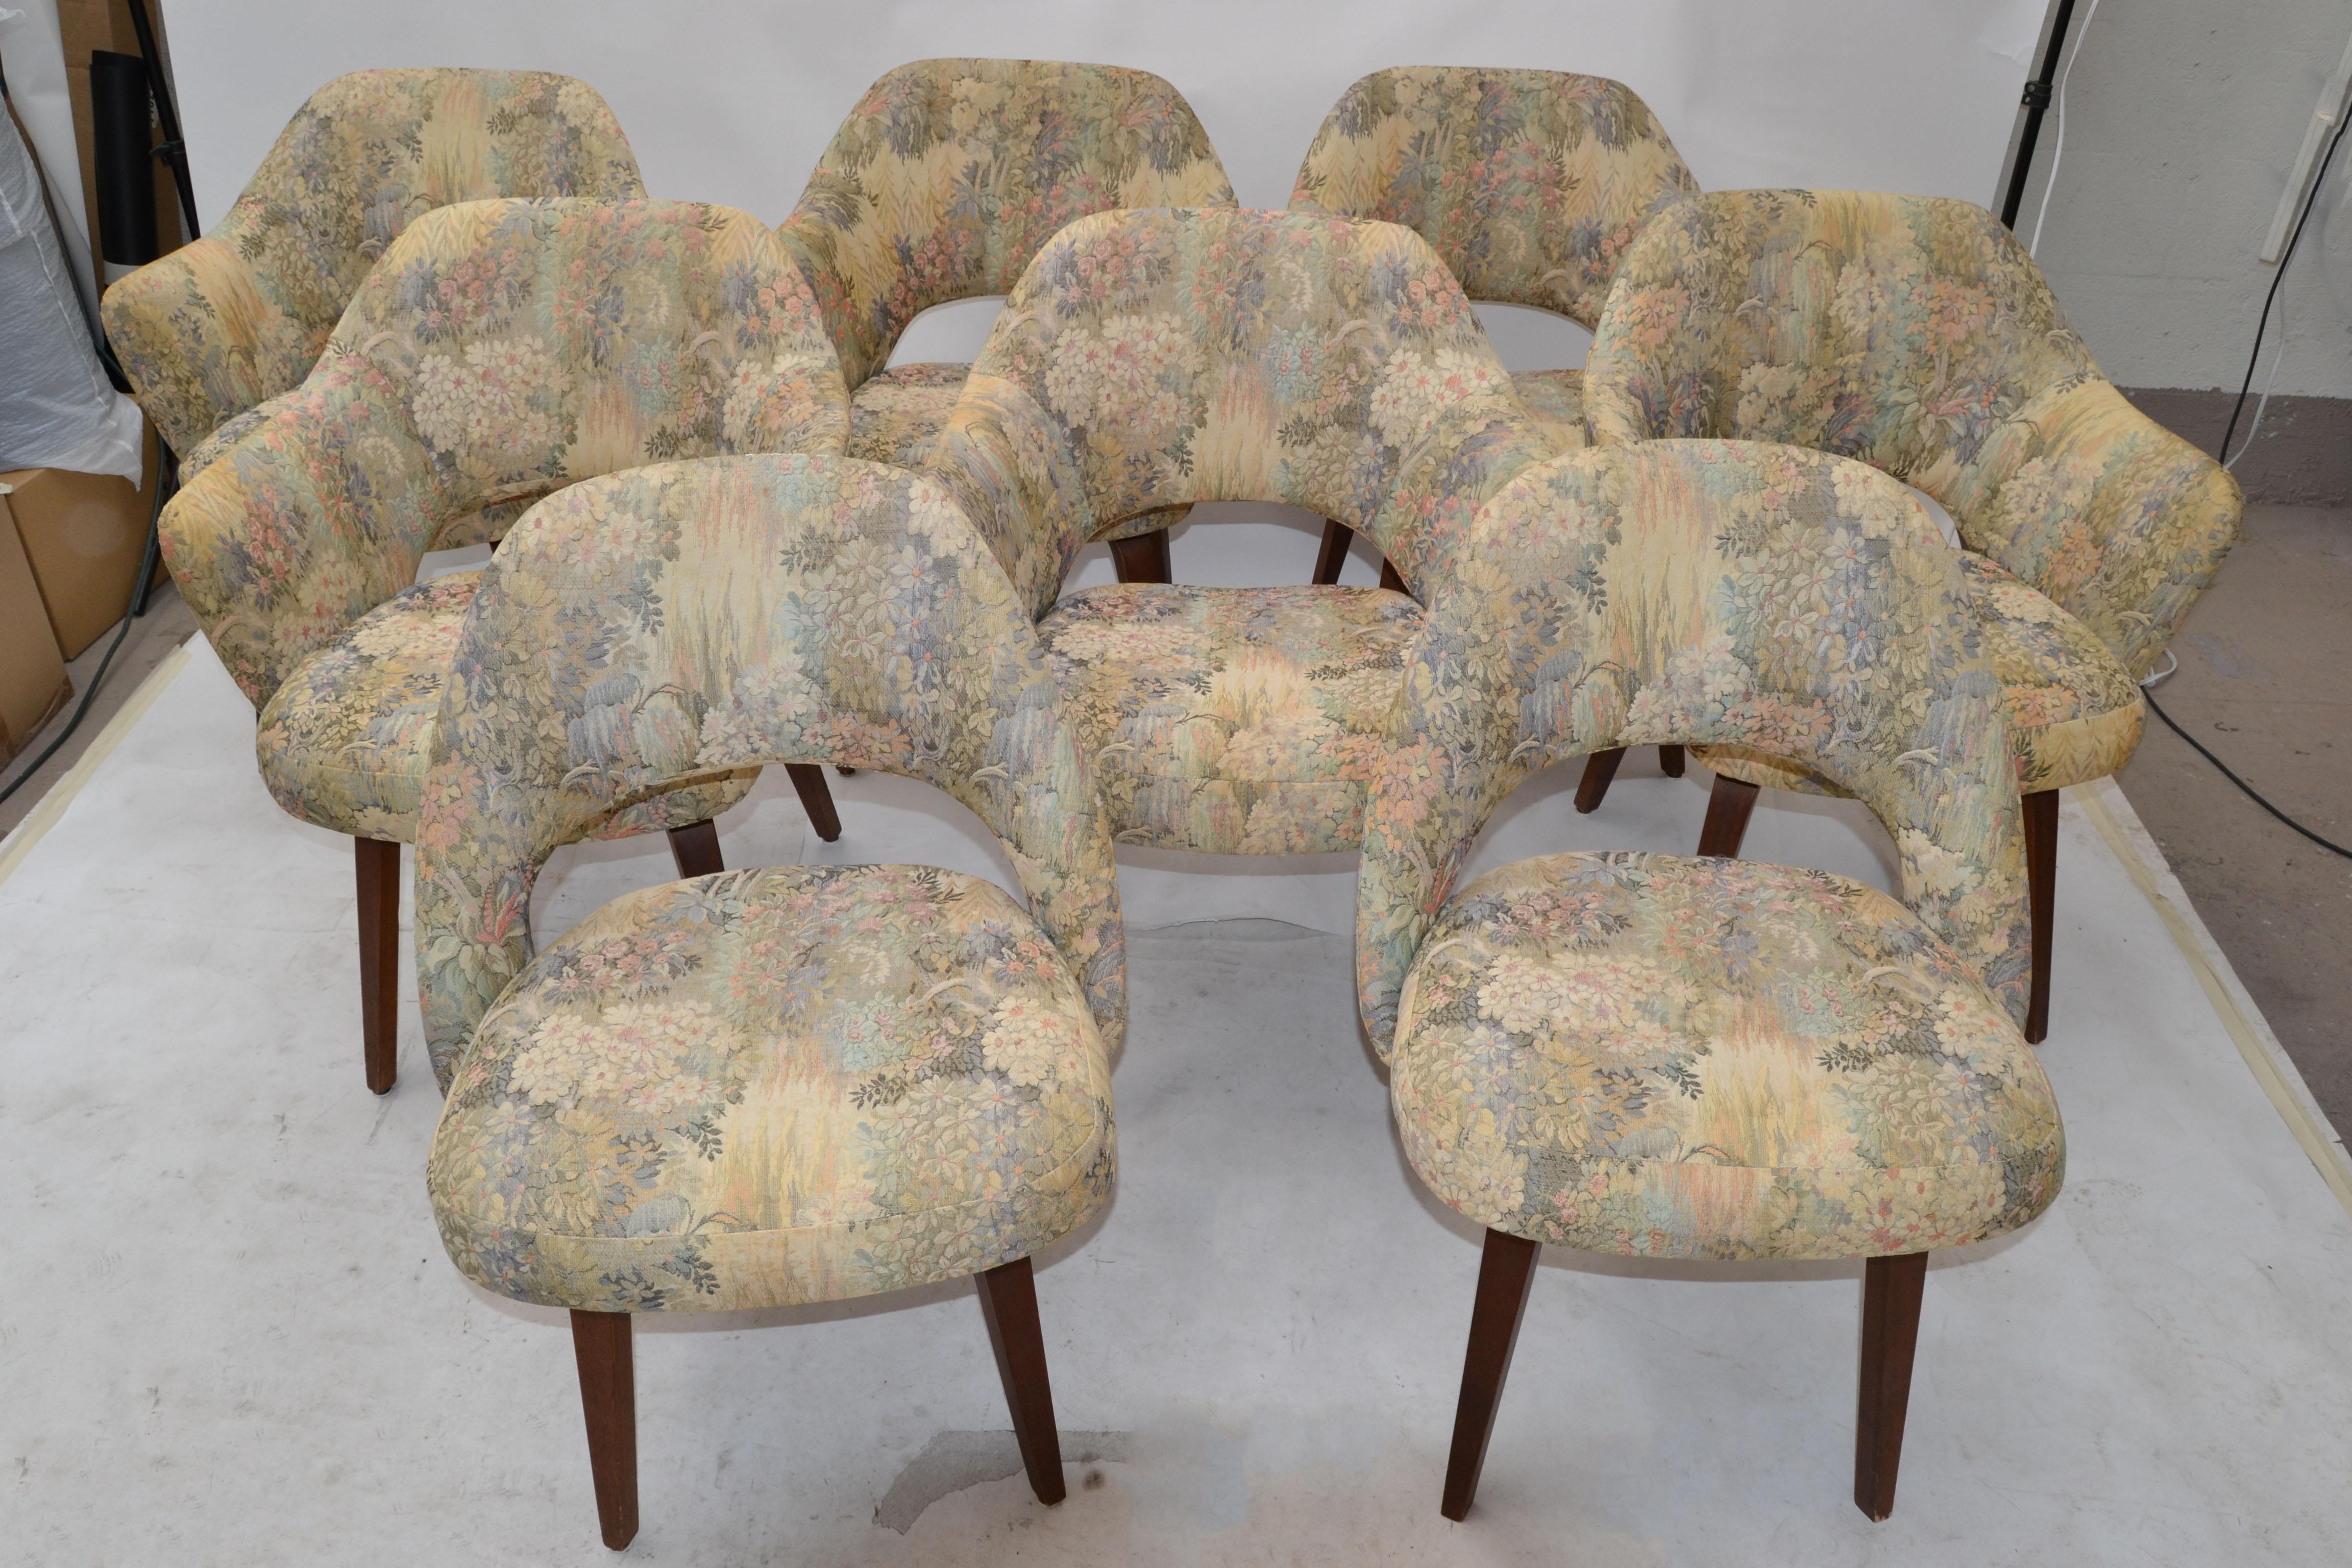 Set of 8 Dining Chairs designed by Eero Saarinen for Knoll in original Fabric and with wooden legs made in the 1950.
We have here 6 armchairs and 2 Side Chairs.
We recommend to have the Set new upholstered.
Side chair measures:
Height: 30.75